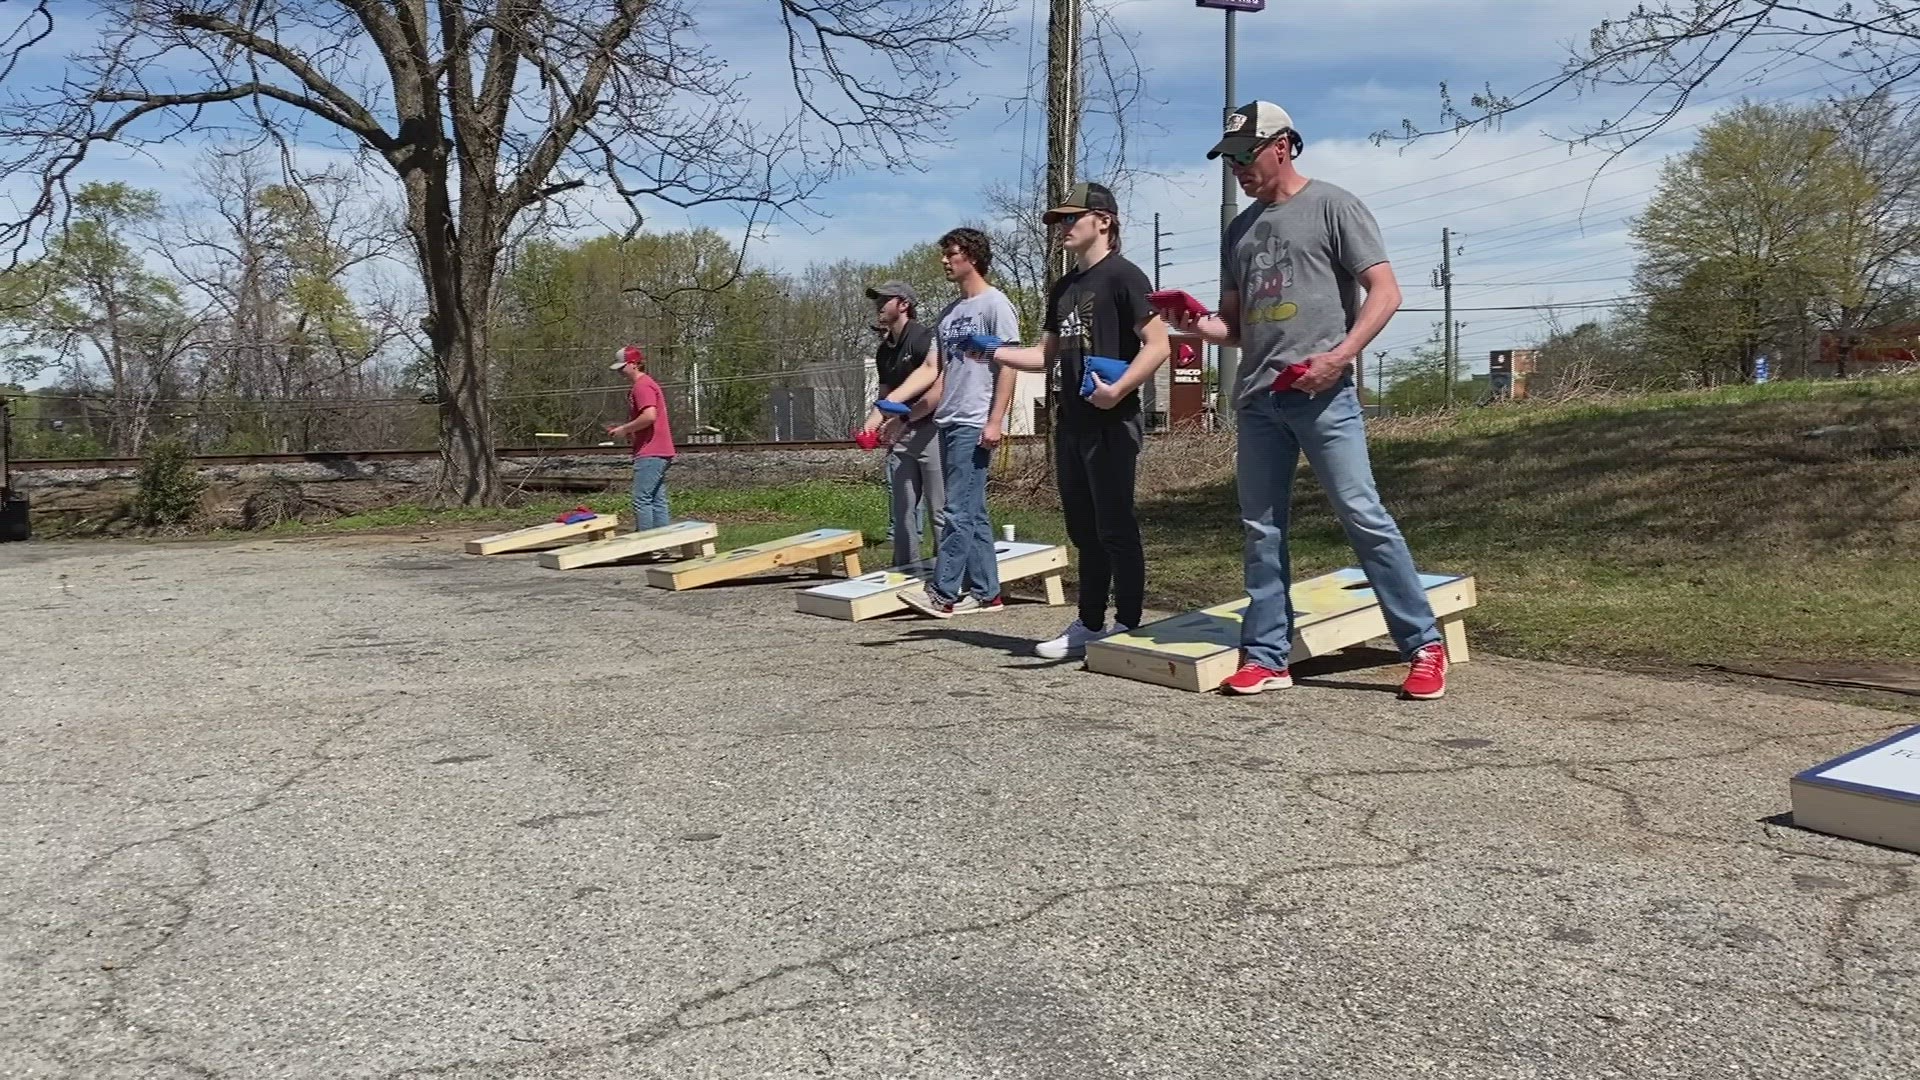 12 different teams competed in cornhole in hopes of winning first place - and some cash.